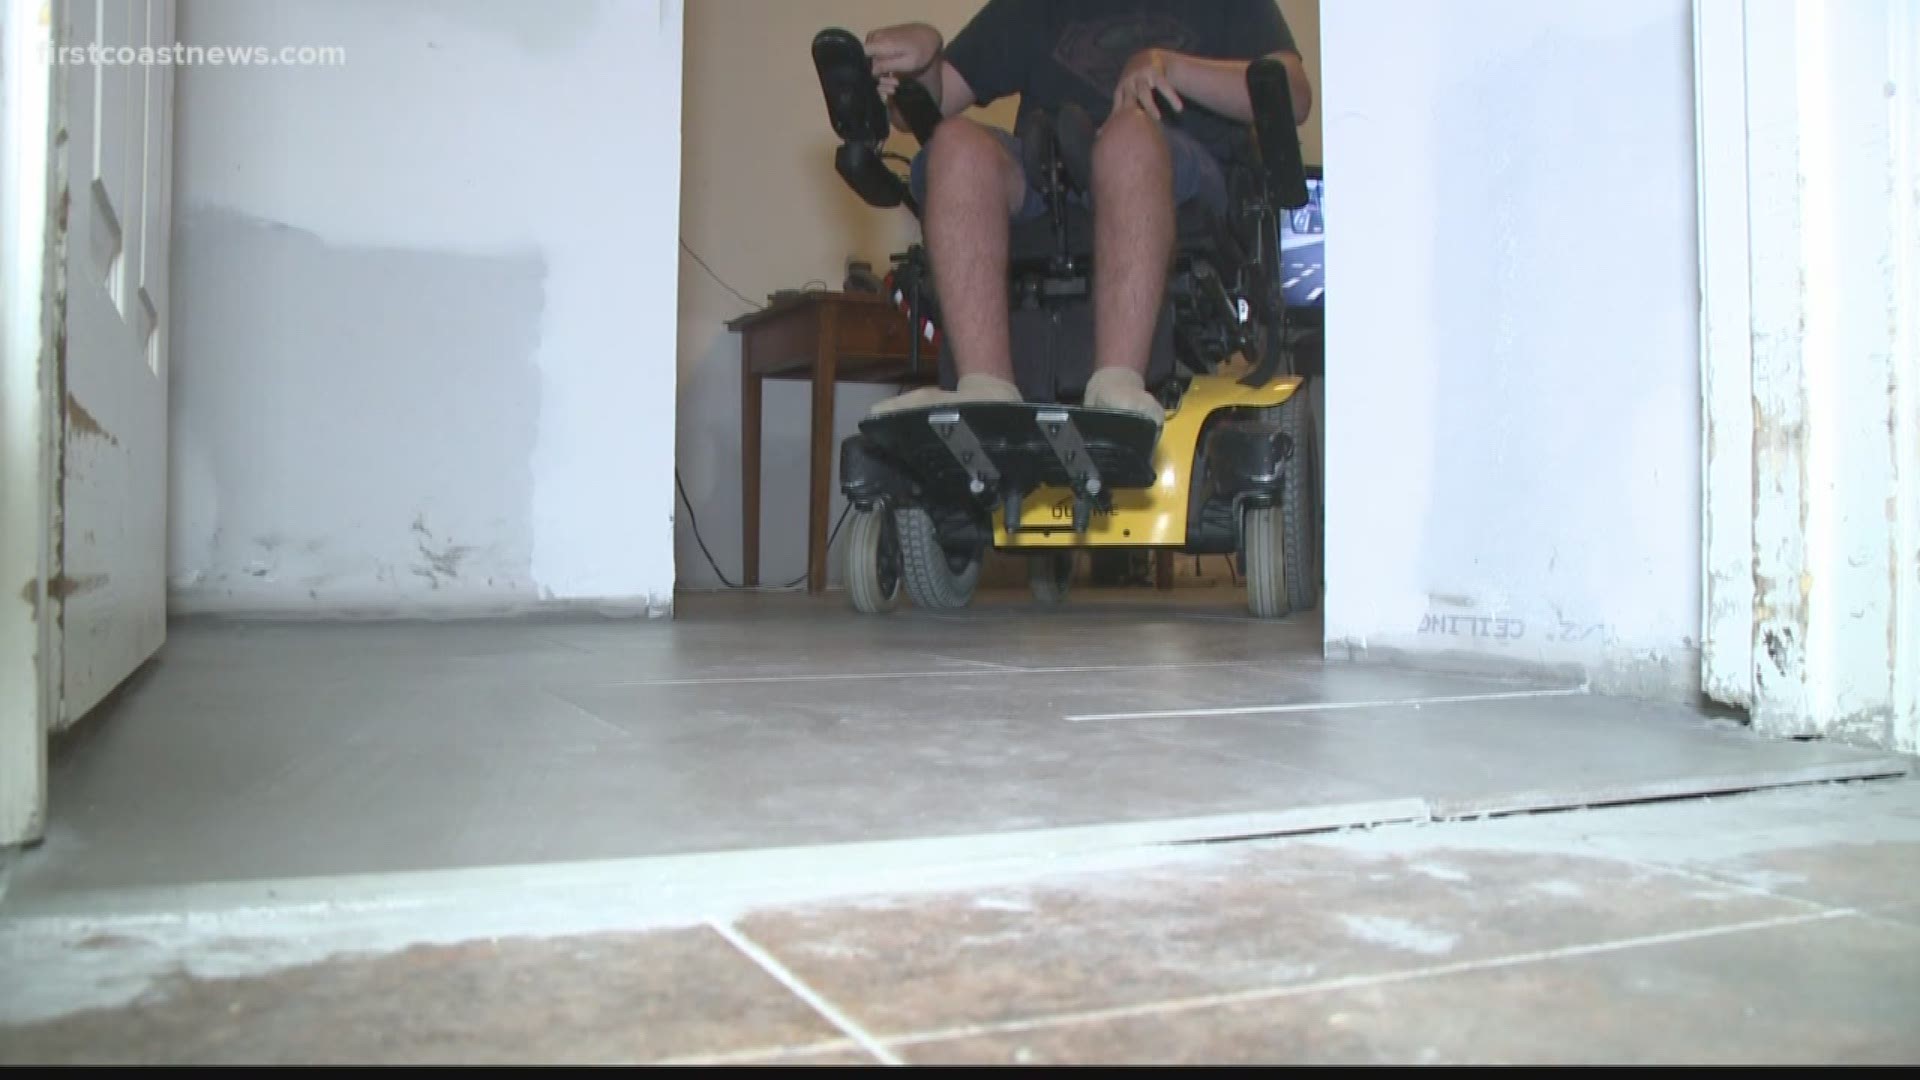 The mother says her insurance ran out, which is problematic because her son has cerebral palsy.